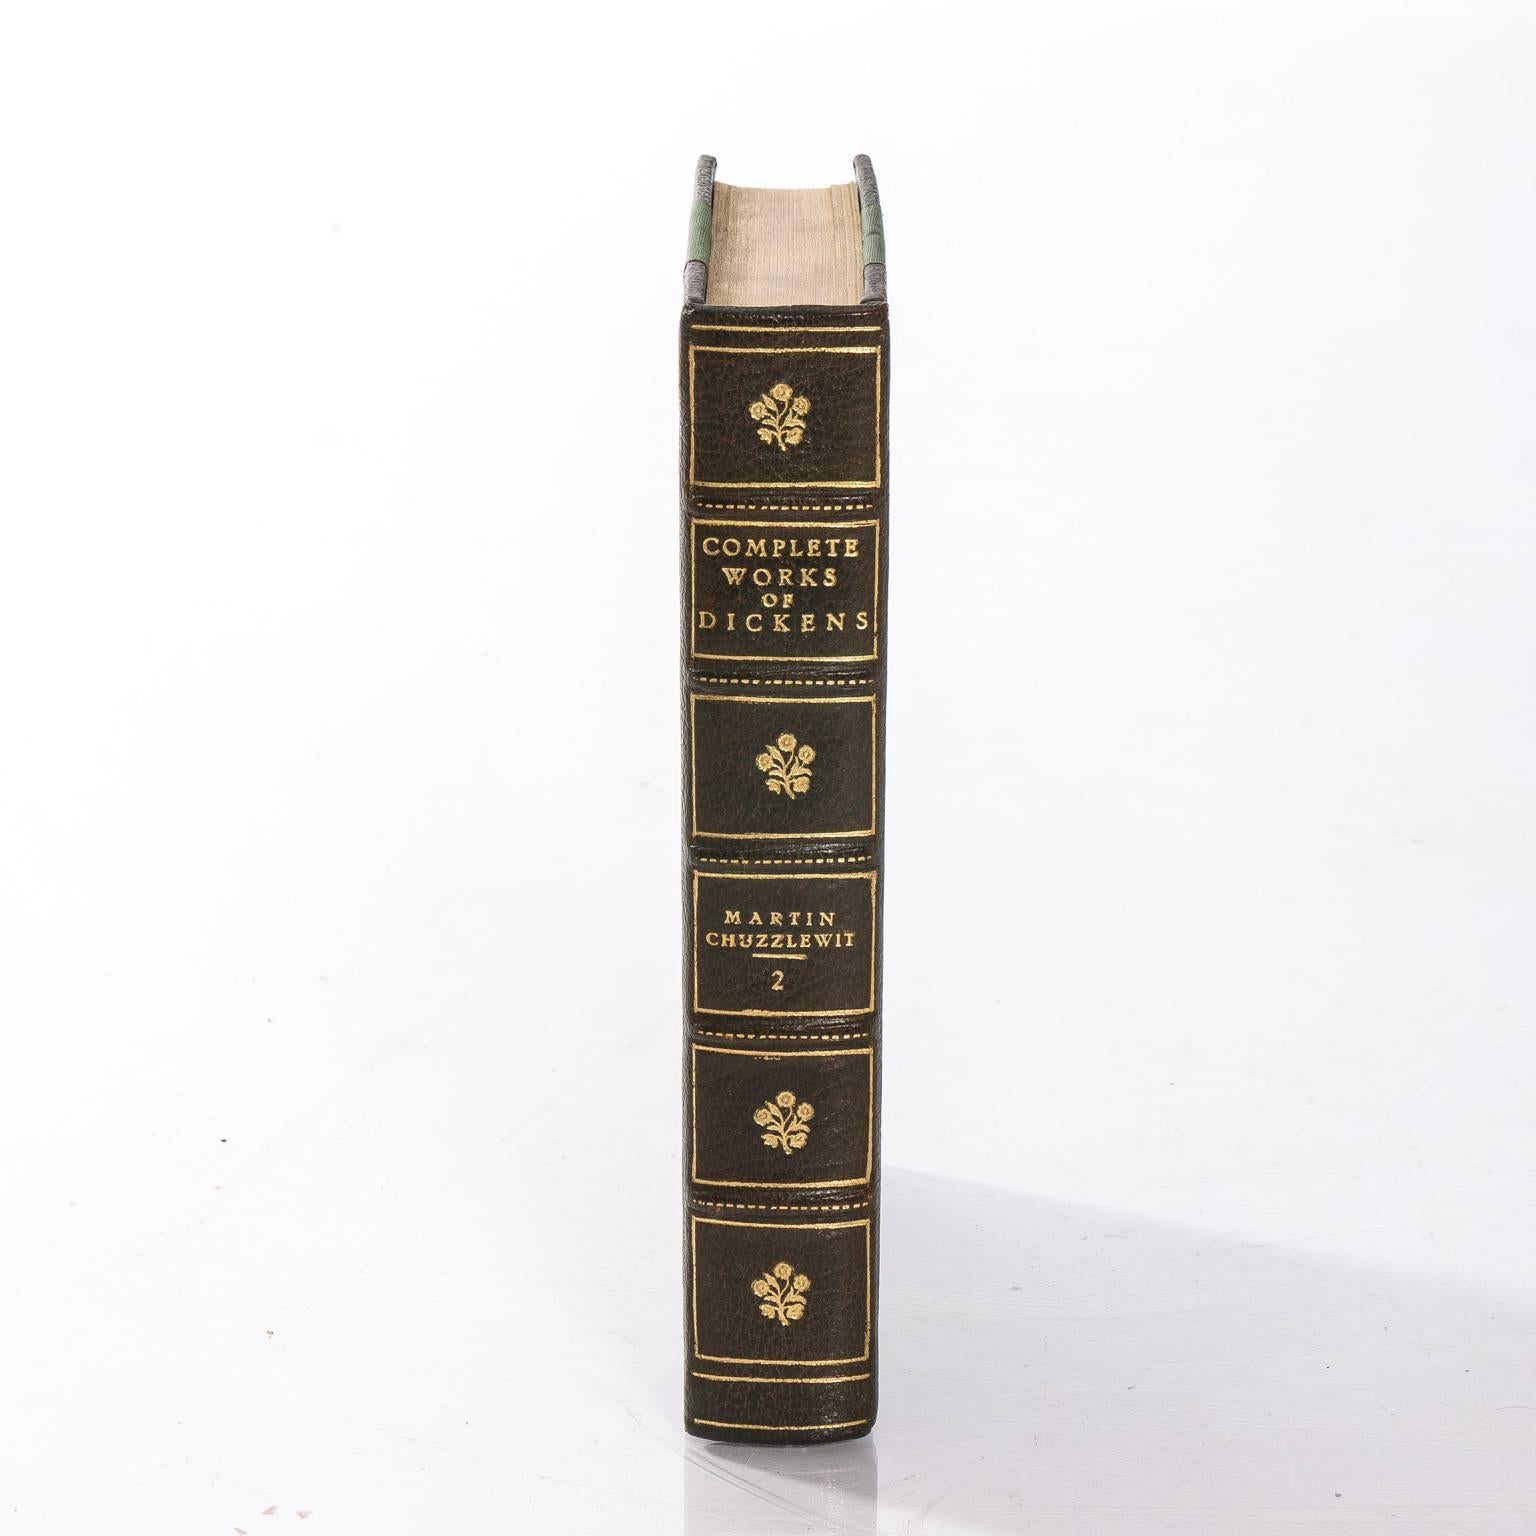 Complete works of Dickens. 30 volumes published by Fred De Fau & Co. New York limited edition.
 